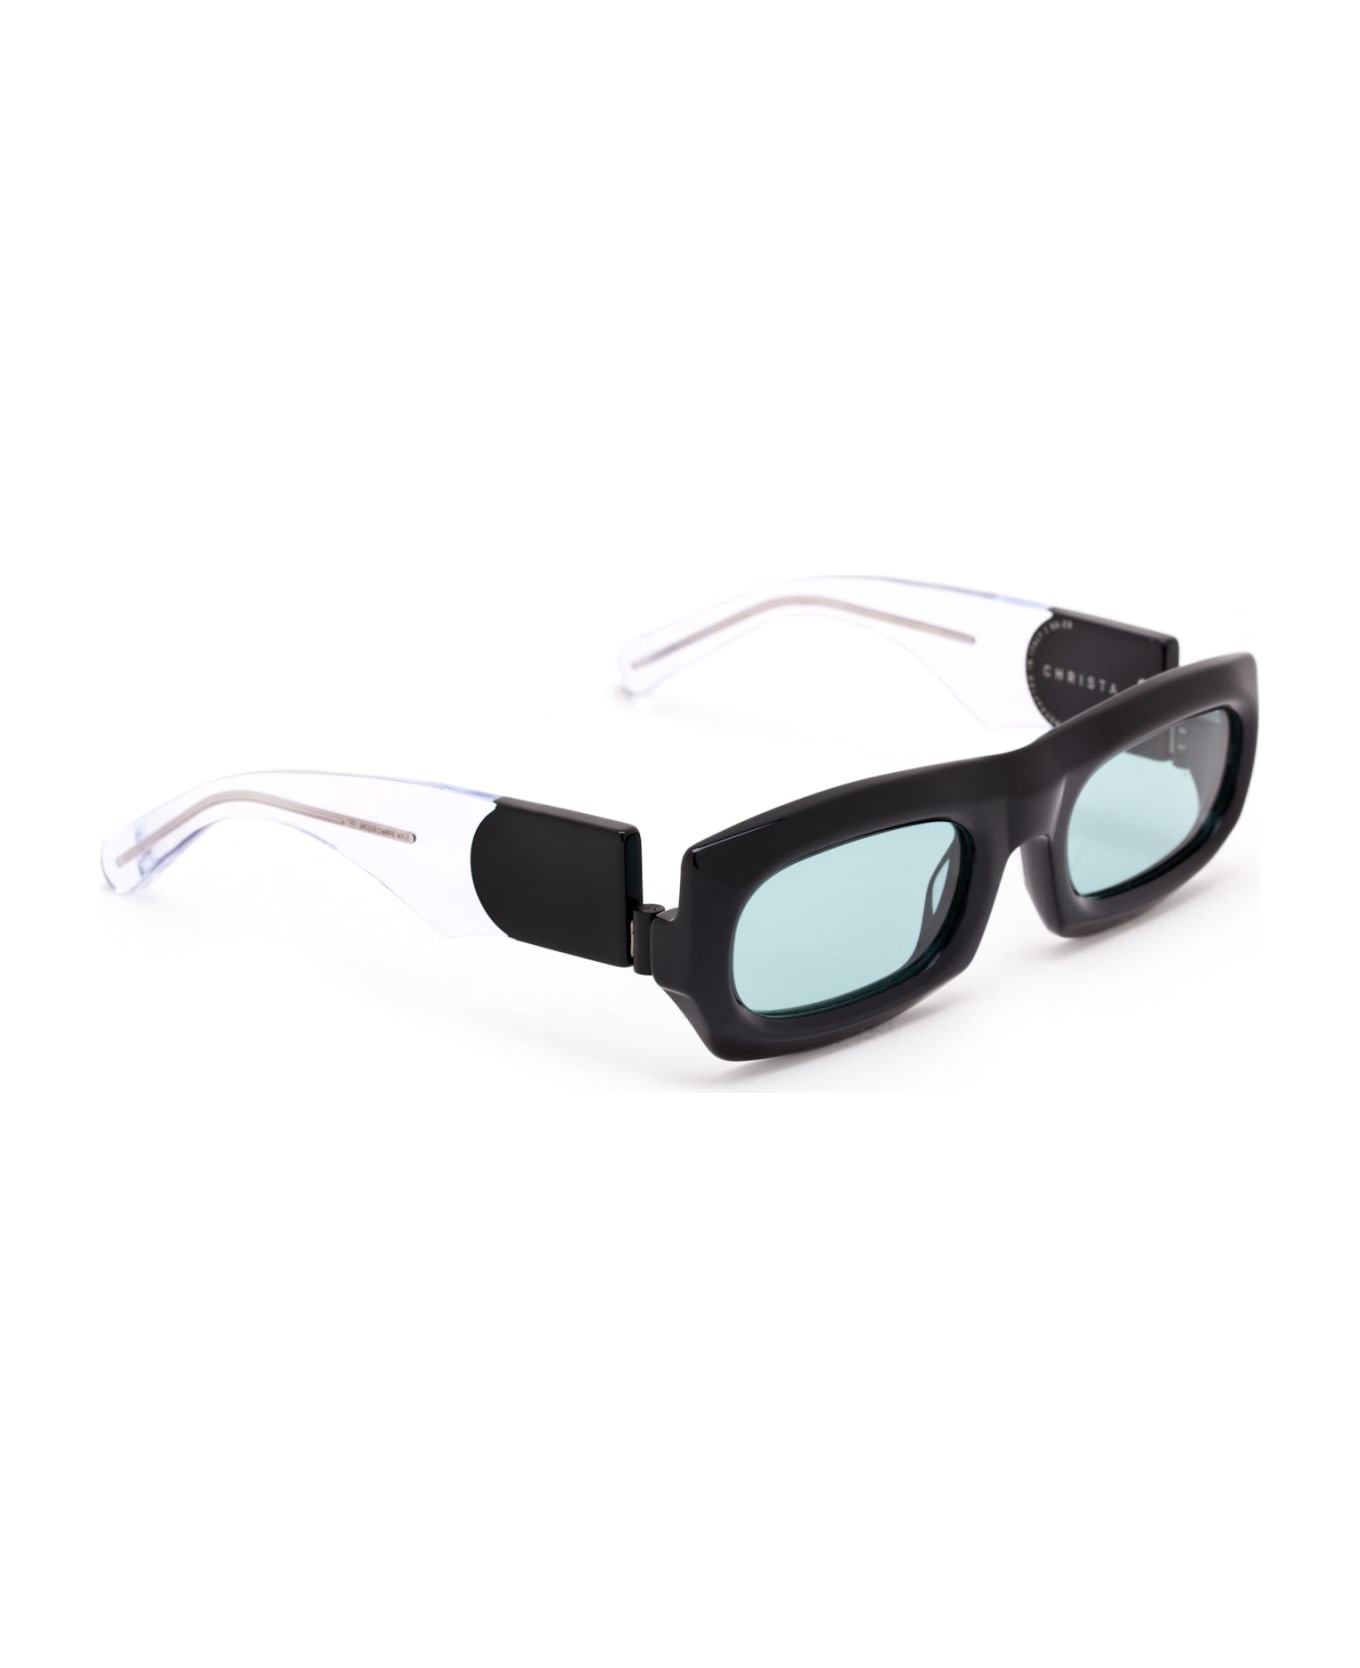 Jacques Marie Mage Vanguard - Christa - Division Sunglasses - black/crystal